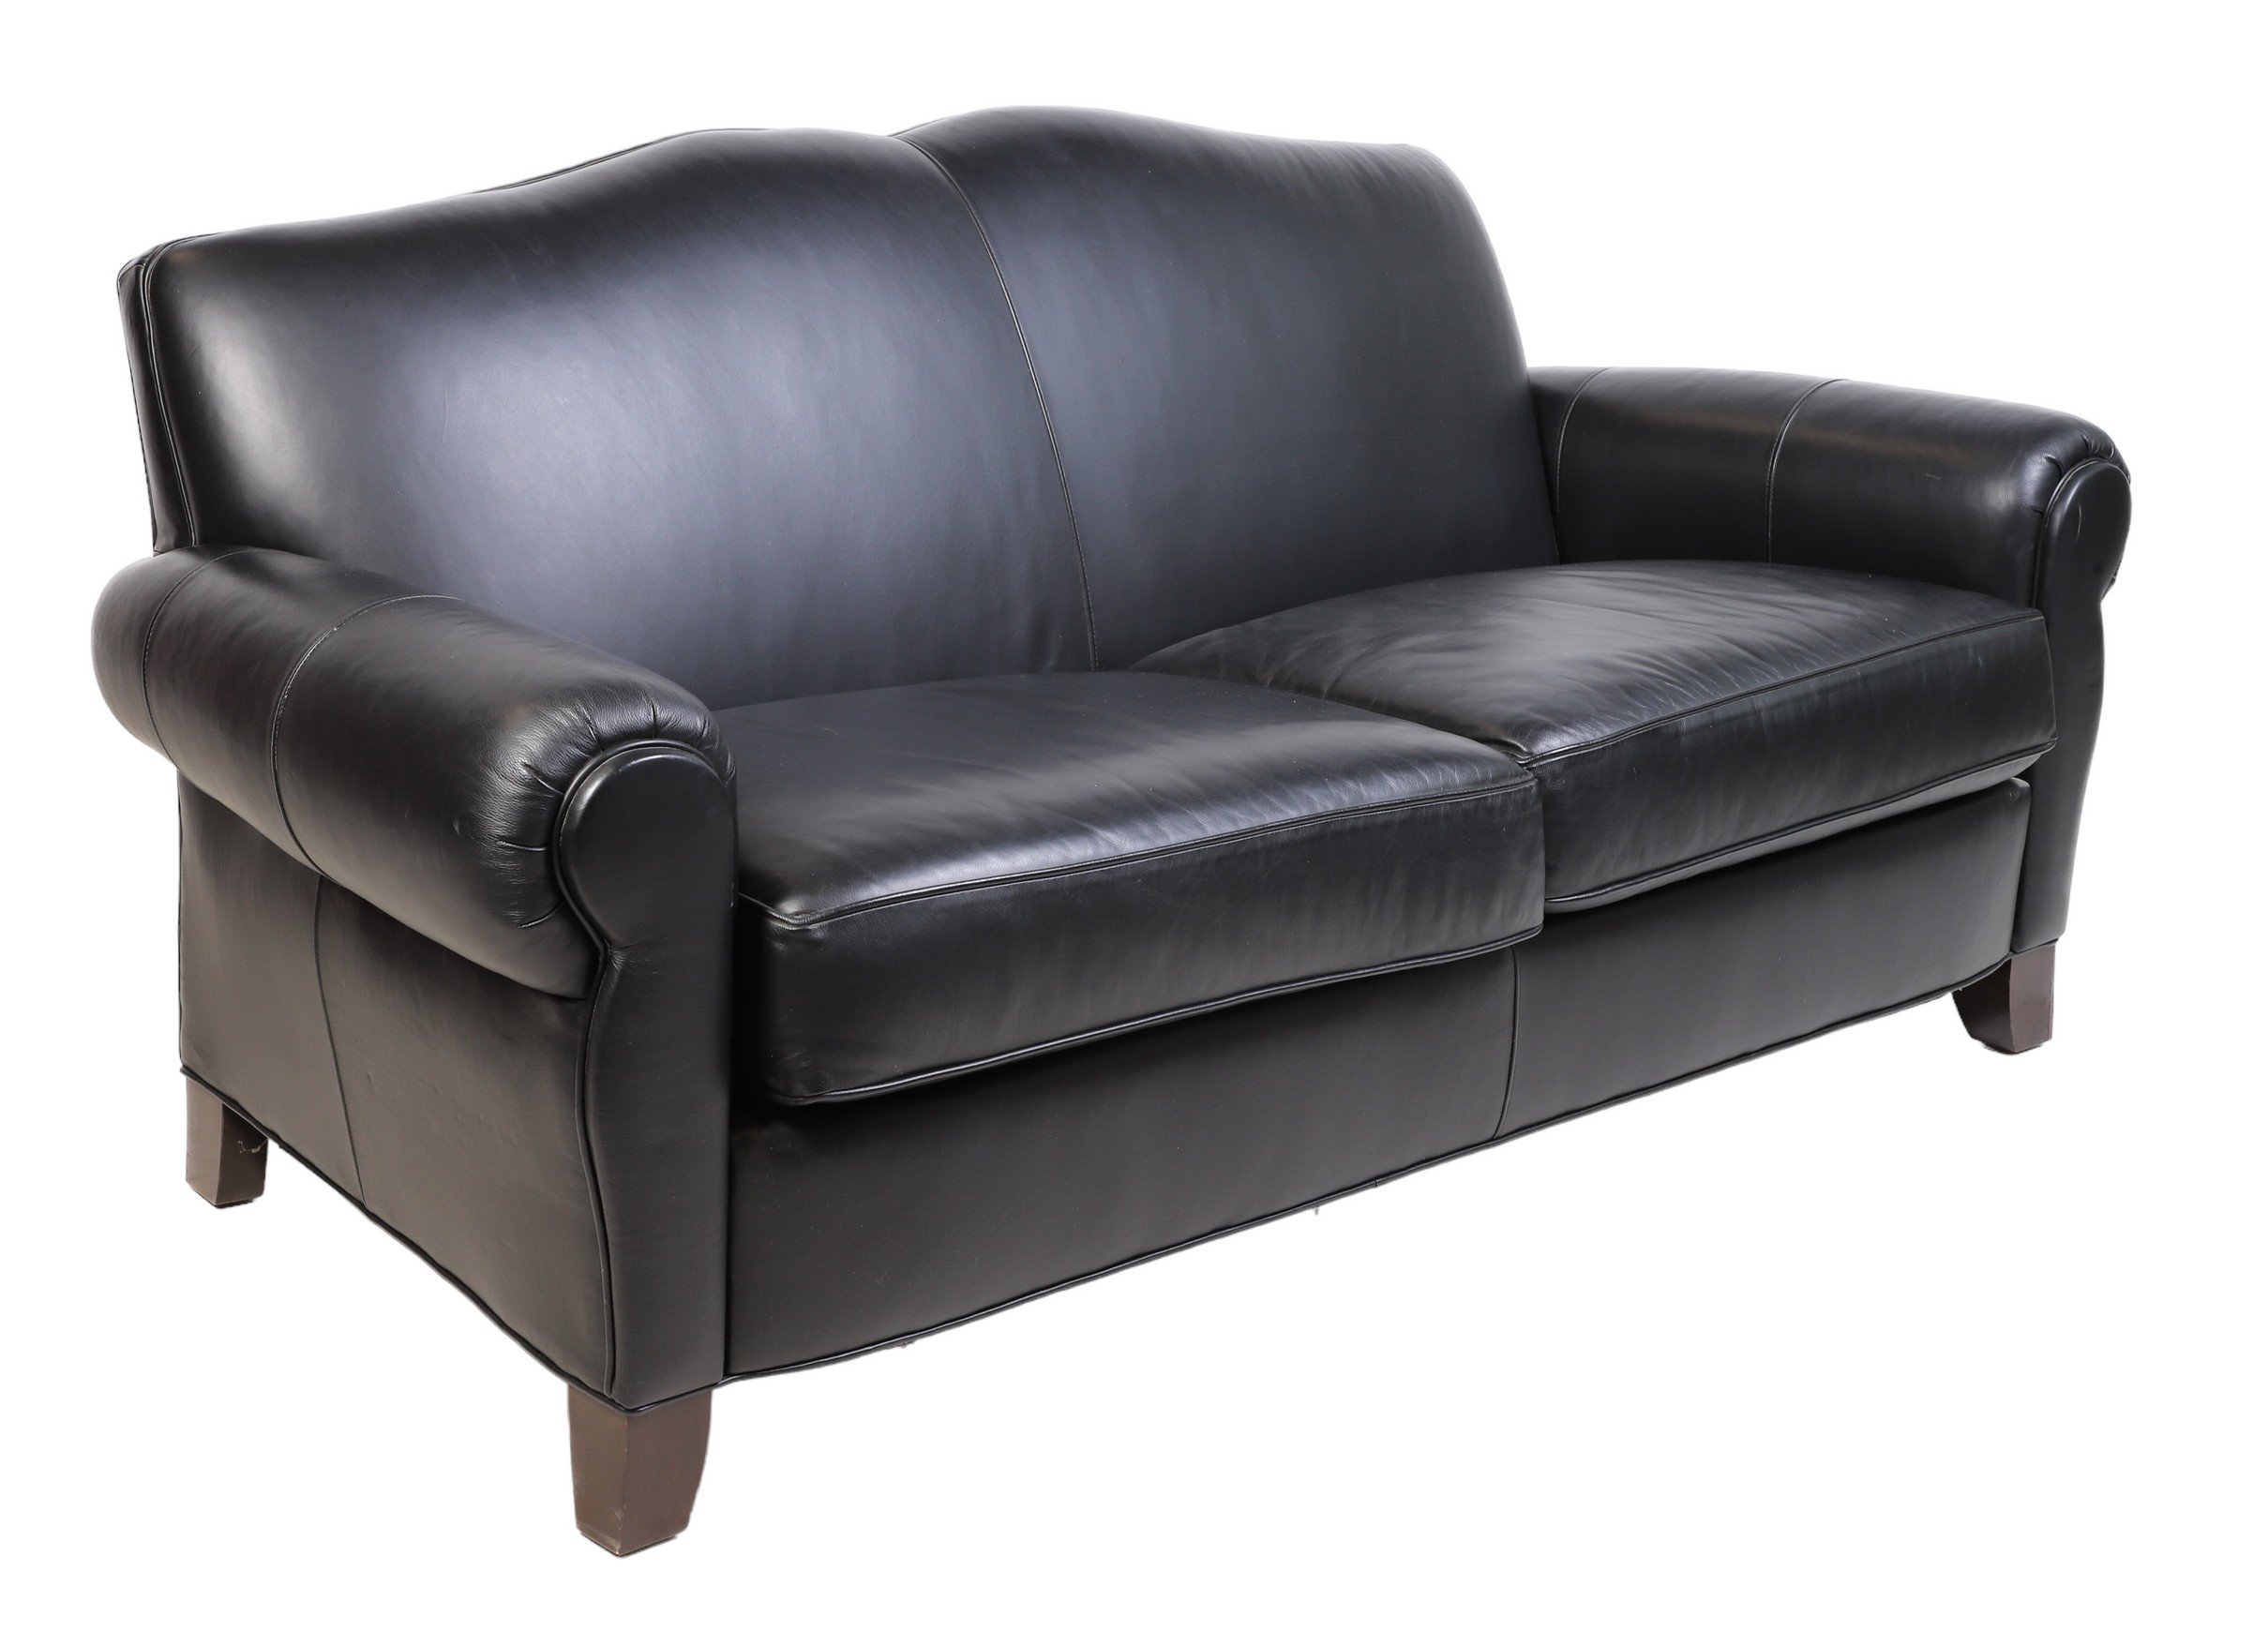 Ethan Allen Contemporary leather 2-seat